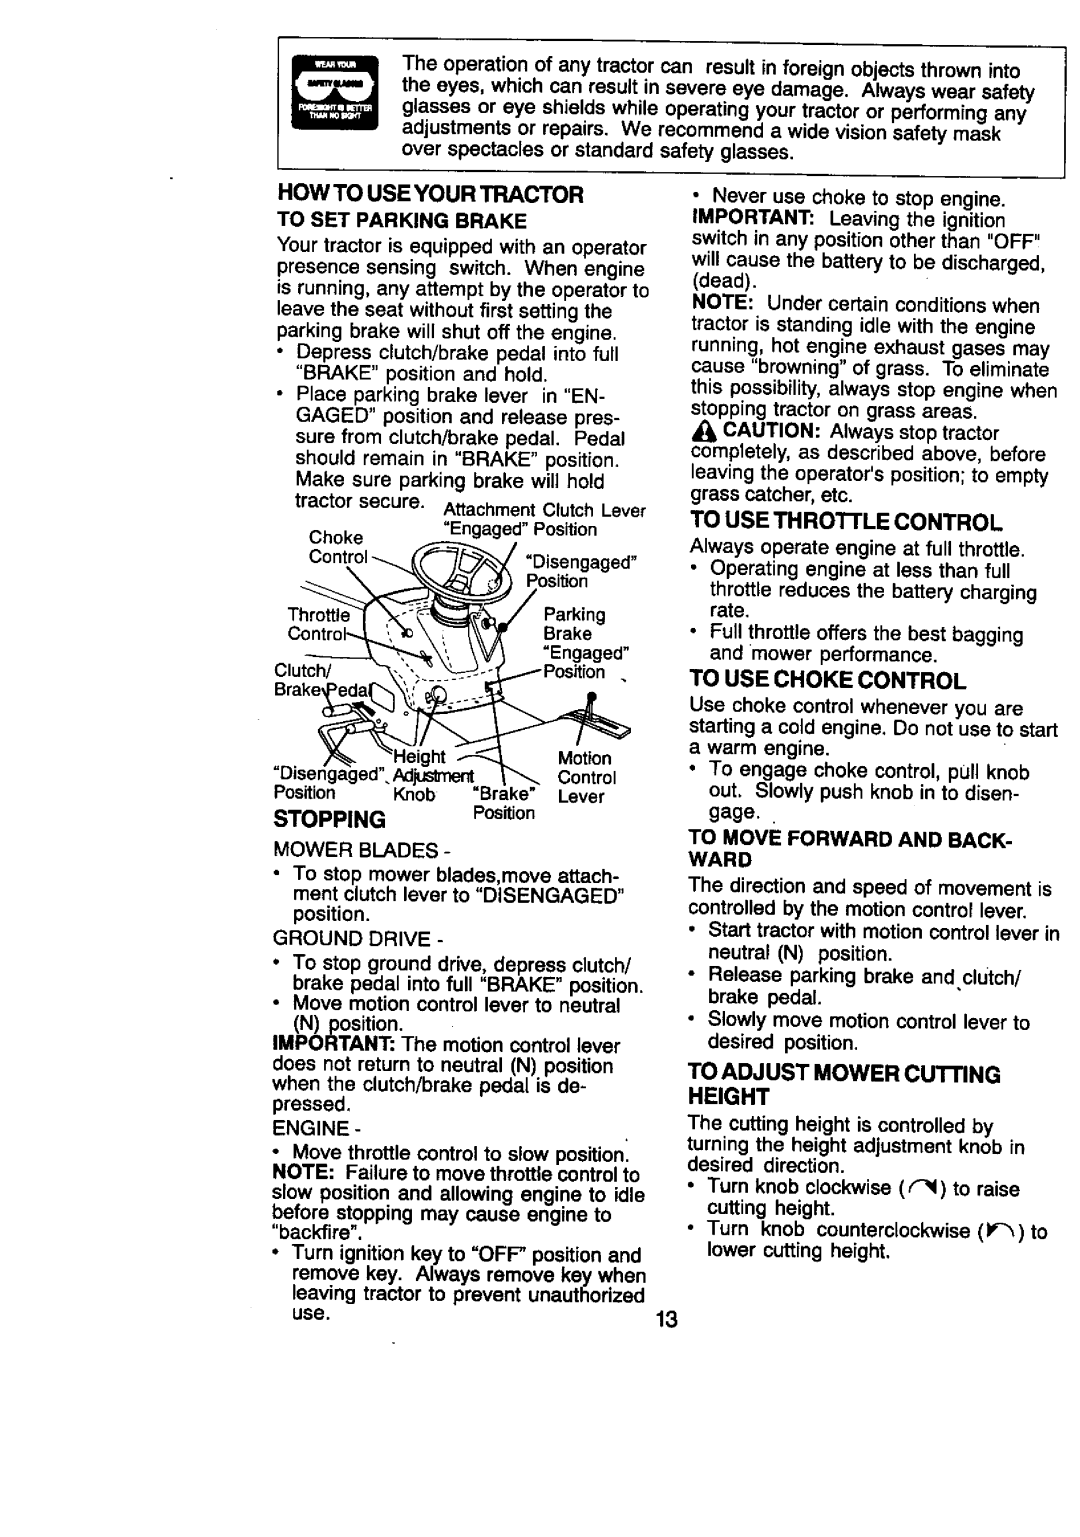 Craftsman 917.27086 manual Parkingrate, How To Use Your Tractor, STOPPINGPosition, Brake 